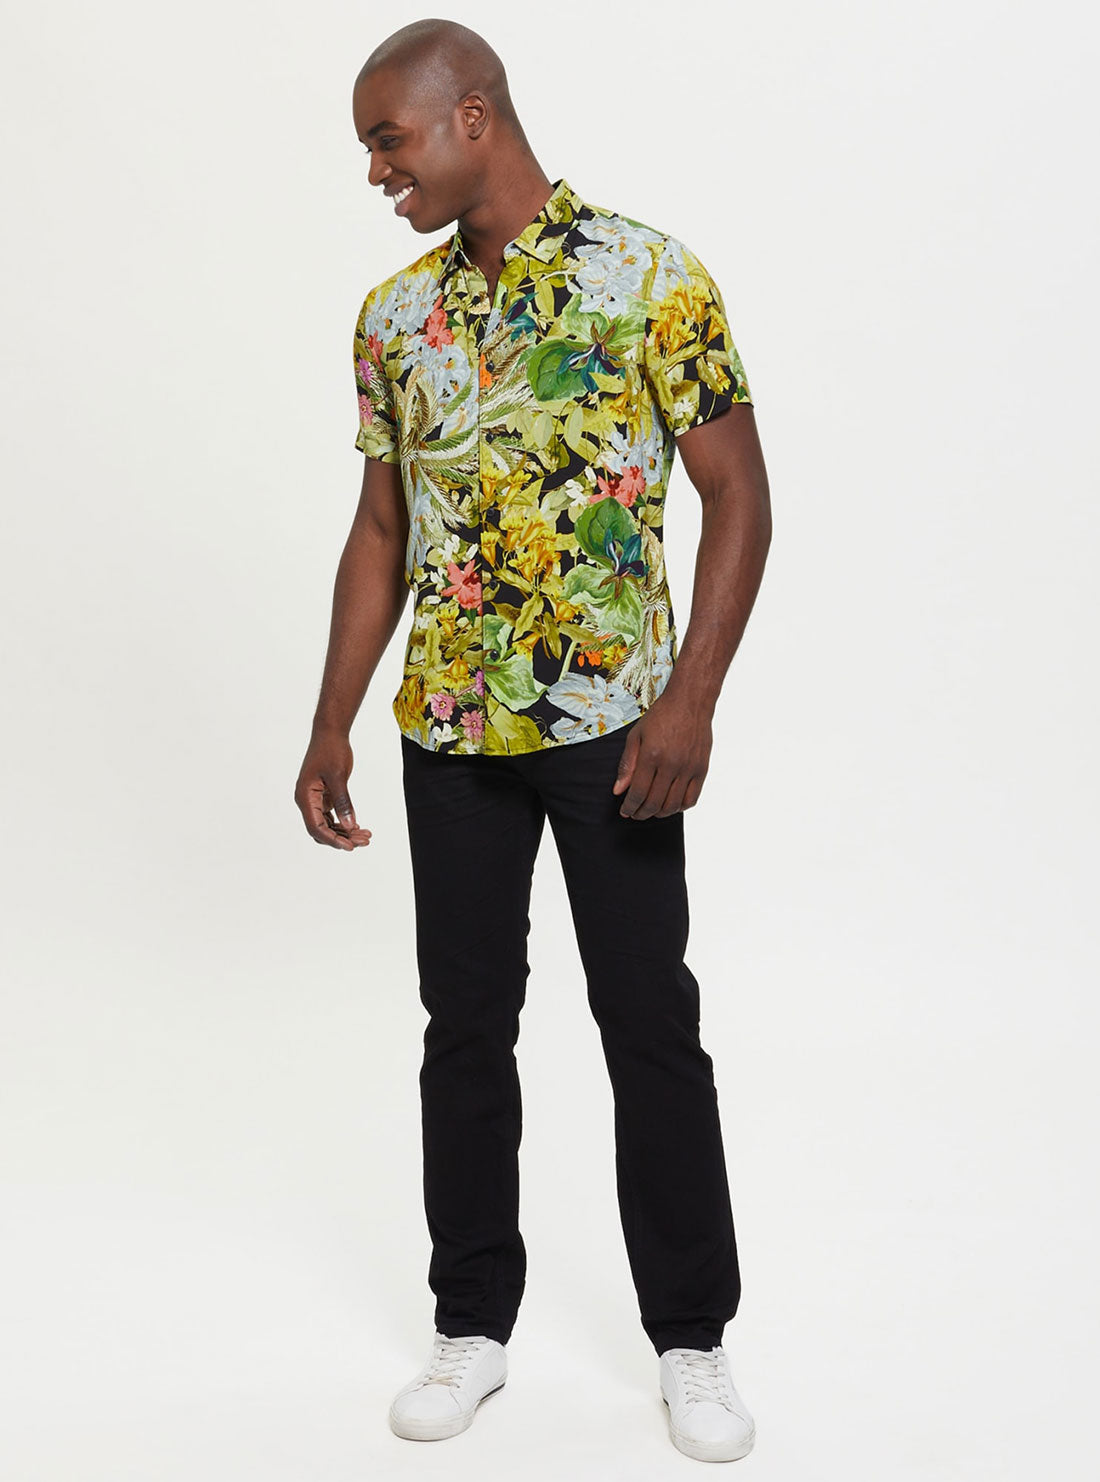 GUESS Men's Eco Storybook Floral Rayon Shirt M2BH22WD4Z2 Full View